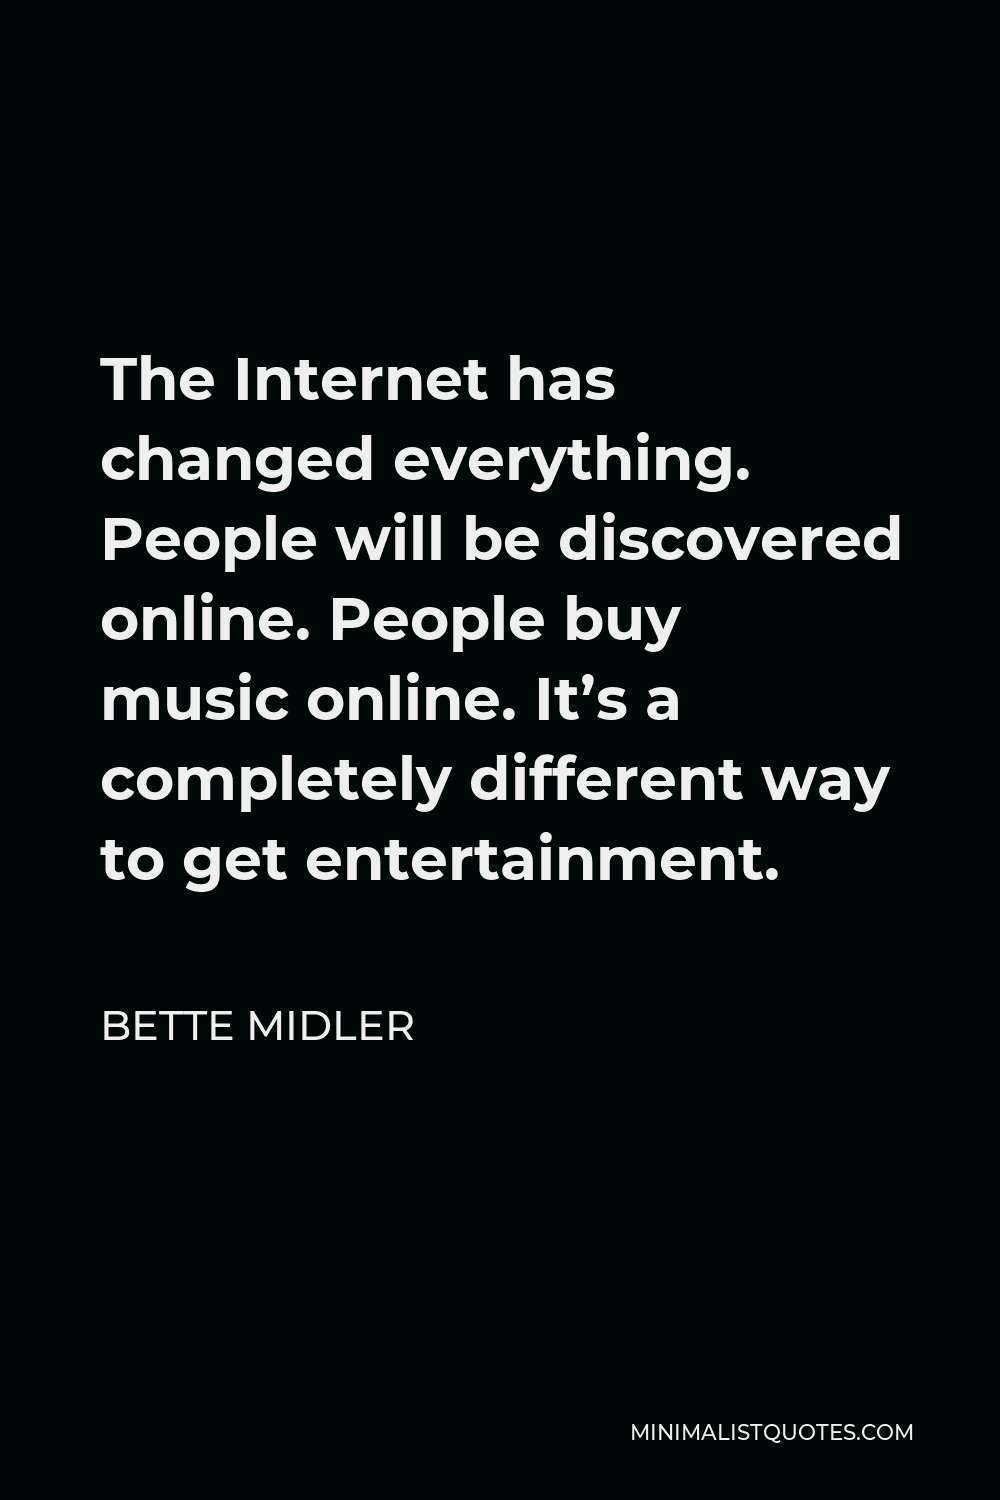 Bette Midler Quote - The Internet has changed everything. People will be discovered online. People buy music online. It’s a completely different way to get entertainment.